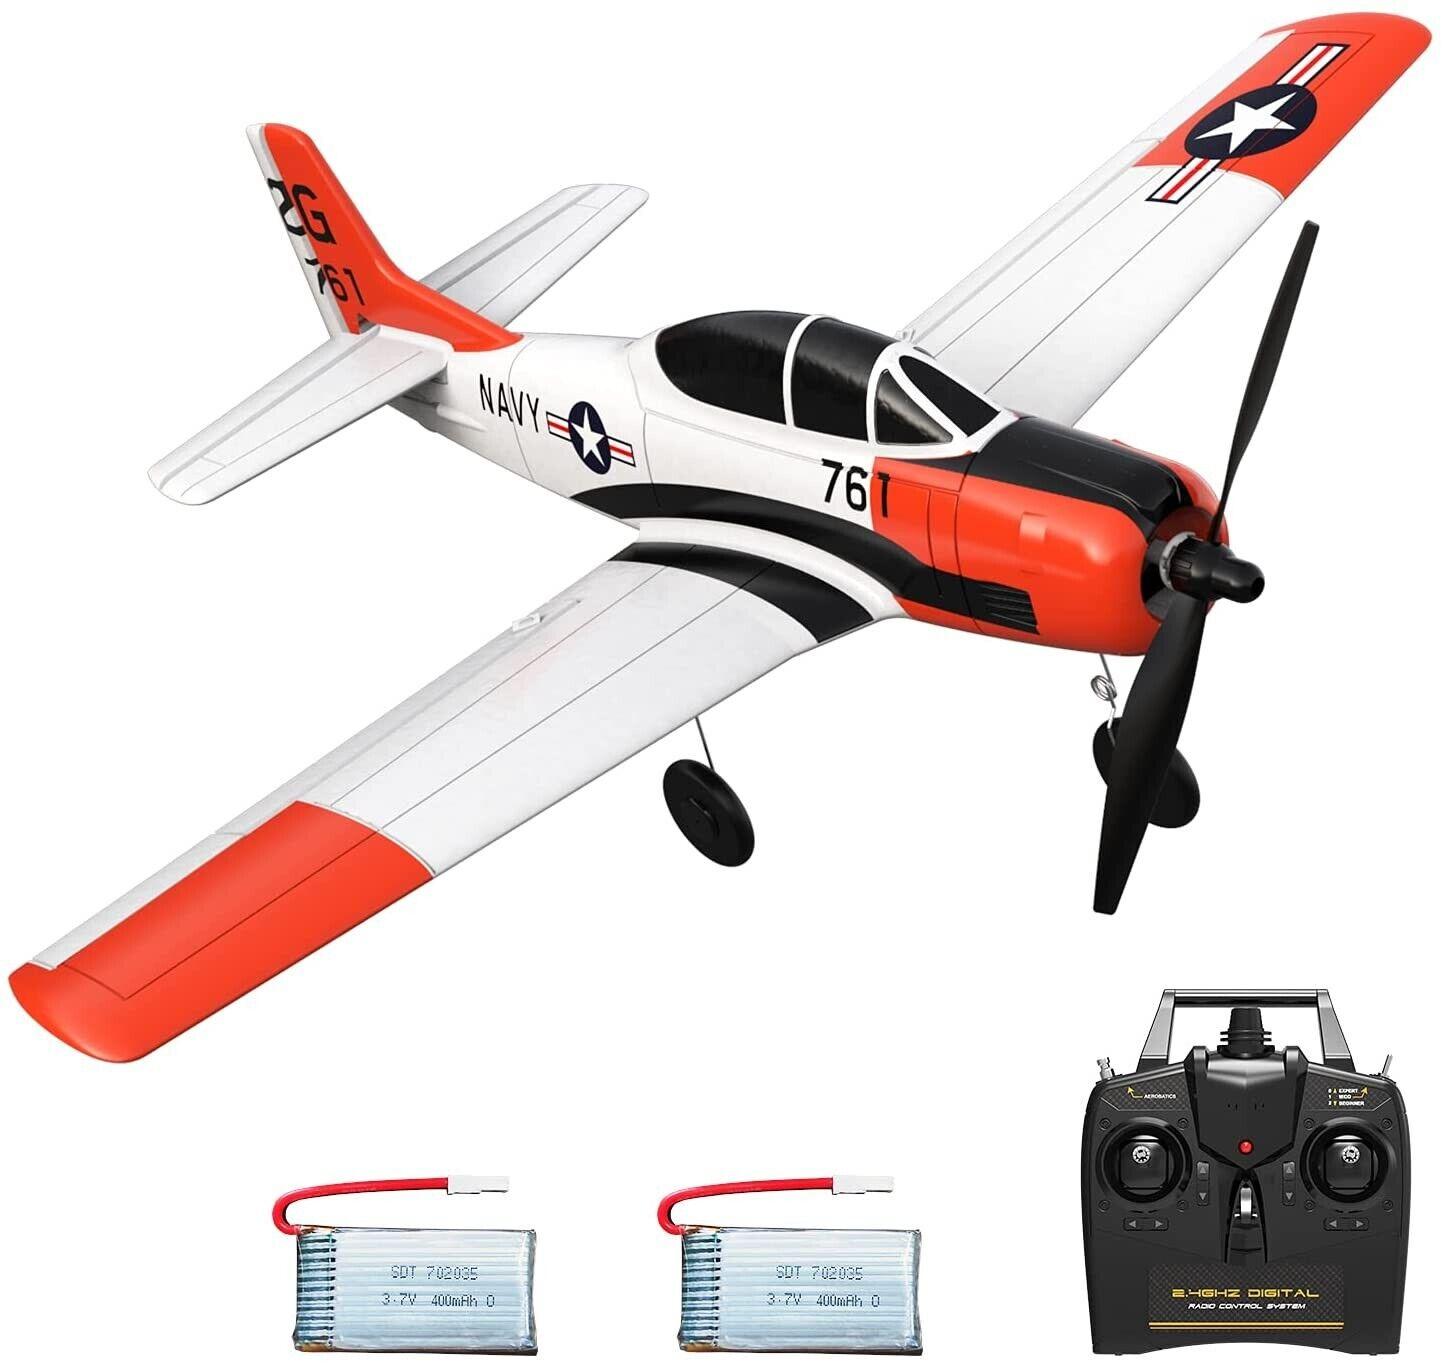 Unbreakable Rc Plane: Product Durability + Performance = Worthwhile Investment